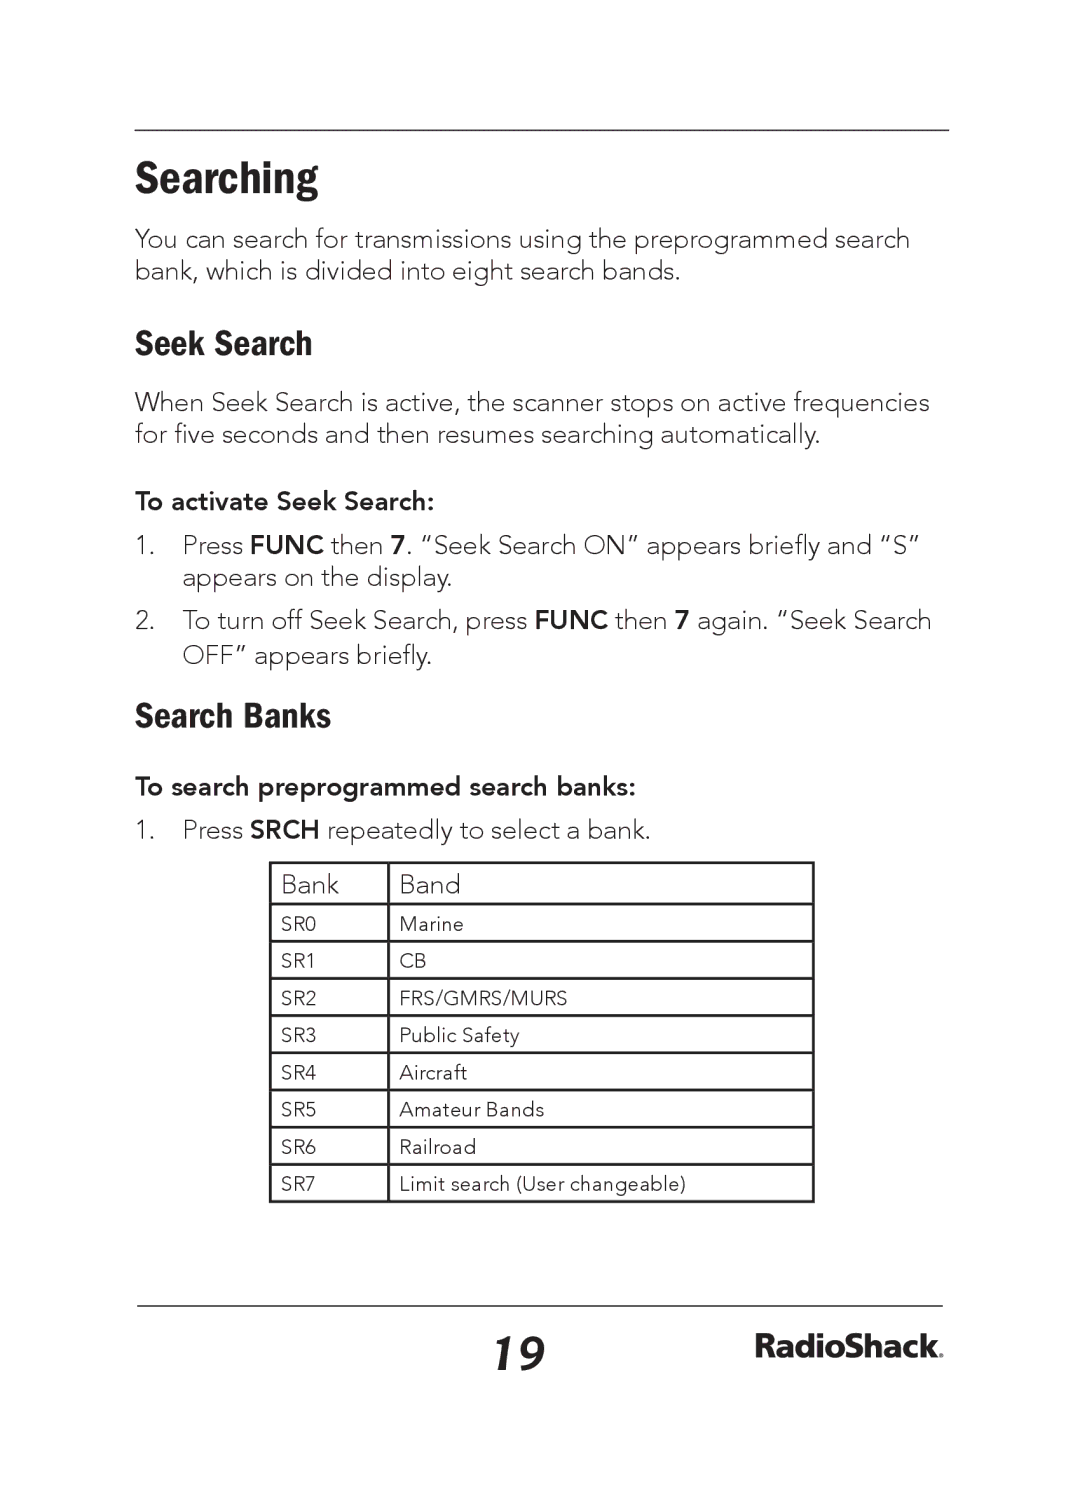 Radio Shack 20-163 manual Searching, Search Banks, To activate Seek Search, To search preprogrammed search banks 